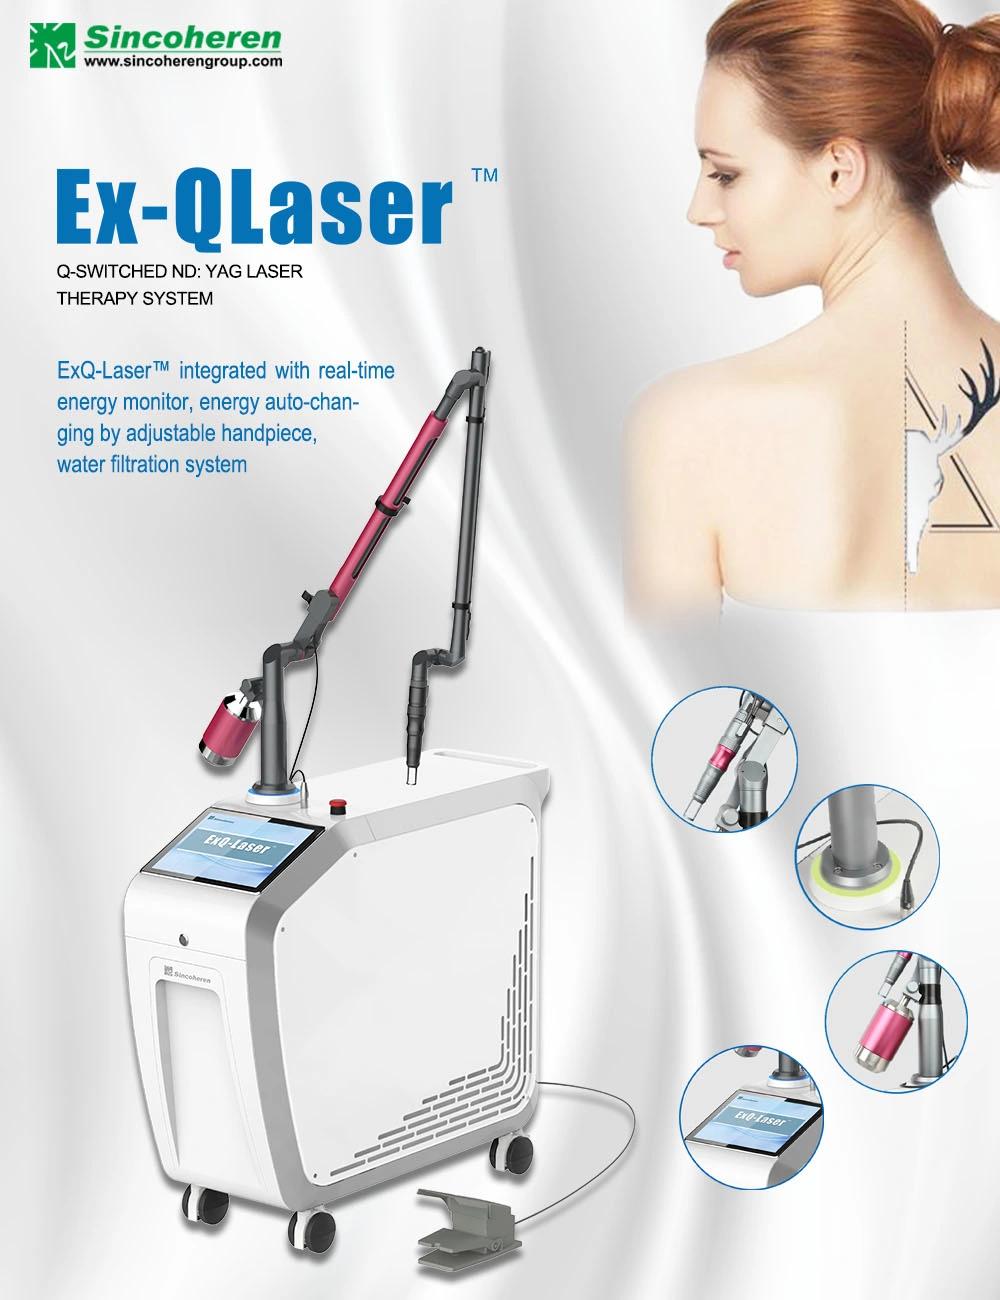 Fast Treatment Medical CE ND YAG Q- Switched Tattoo Removal Machine ND YAG Painless Laser Pigmentation Removal Machine